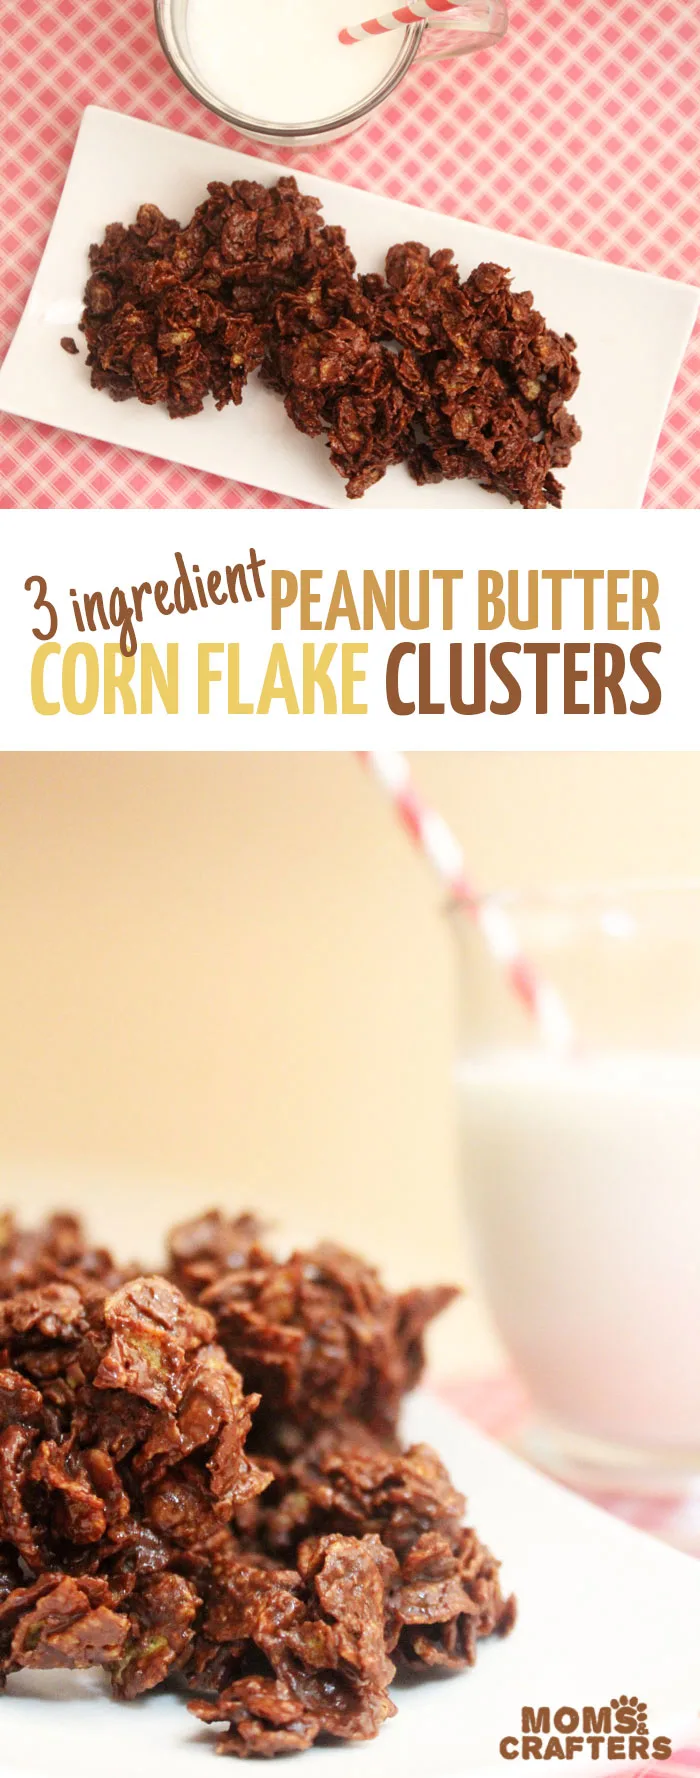 Delicious peanut butter corn flake clusters are a delicious take on a classic easy dessert or snack! Click for this 3 ingredient really easy recipe!